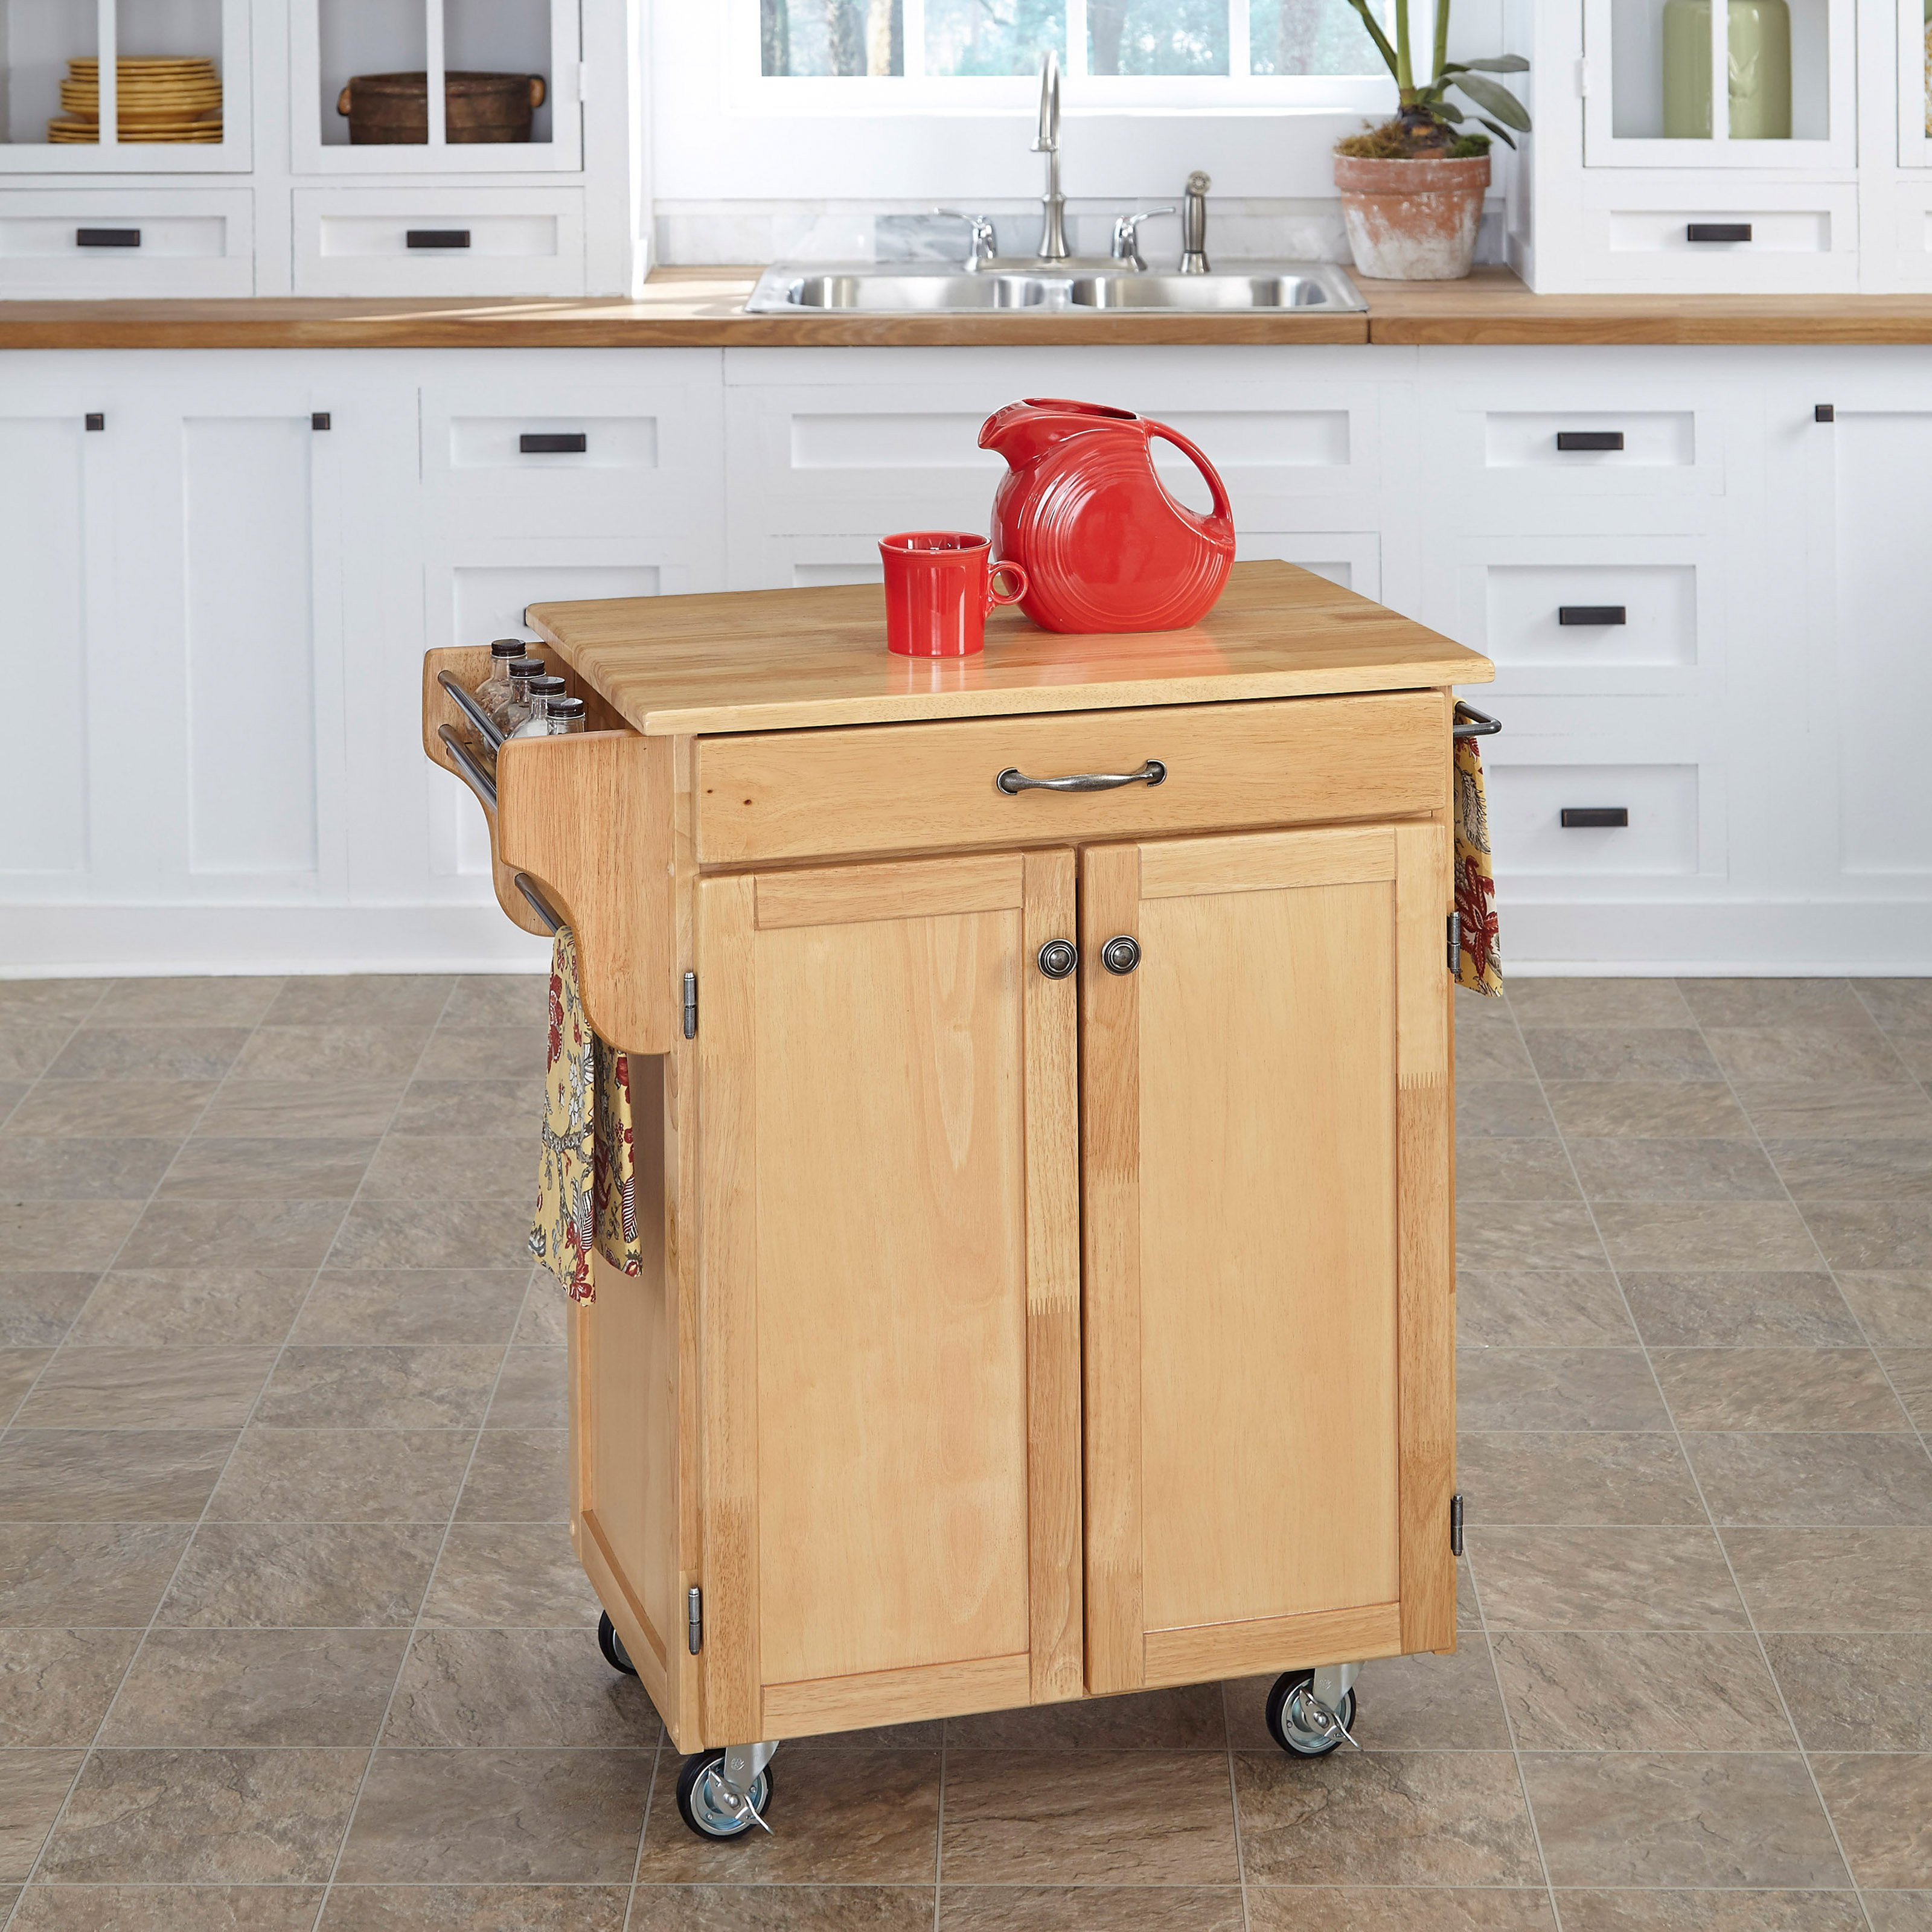 Small Kitchen Island Cart
 Home Styles Design Your Own Small Kitchen Cart Kitchen